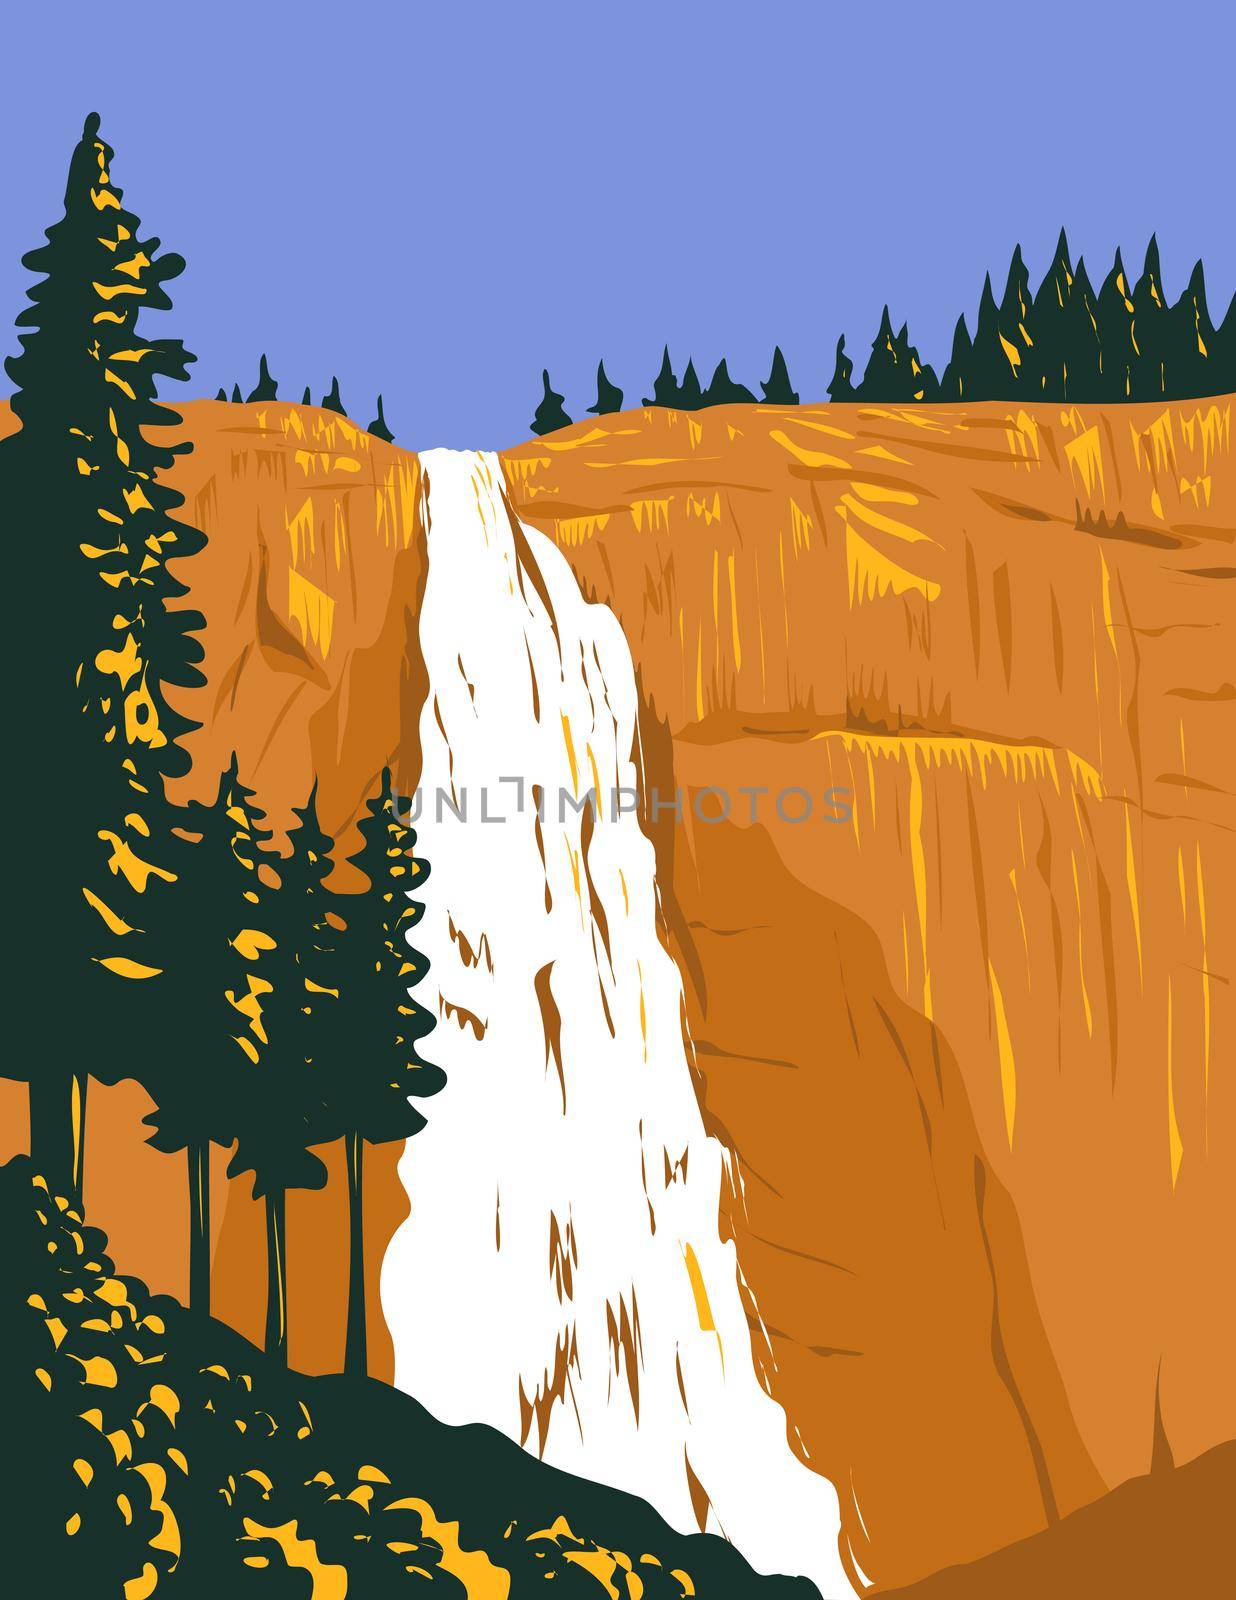 WPA poster art of Nevada Falls on the Merced River below granite dome Liberty Cap west of Little Yosemite Valley in Yosemite National Park, California USA done in works project administration style. 